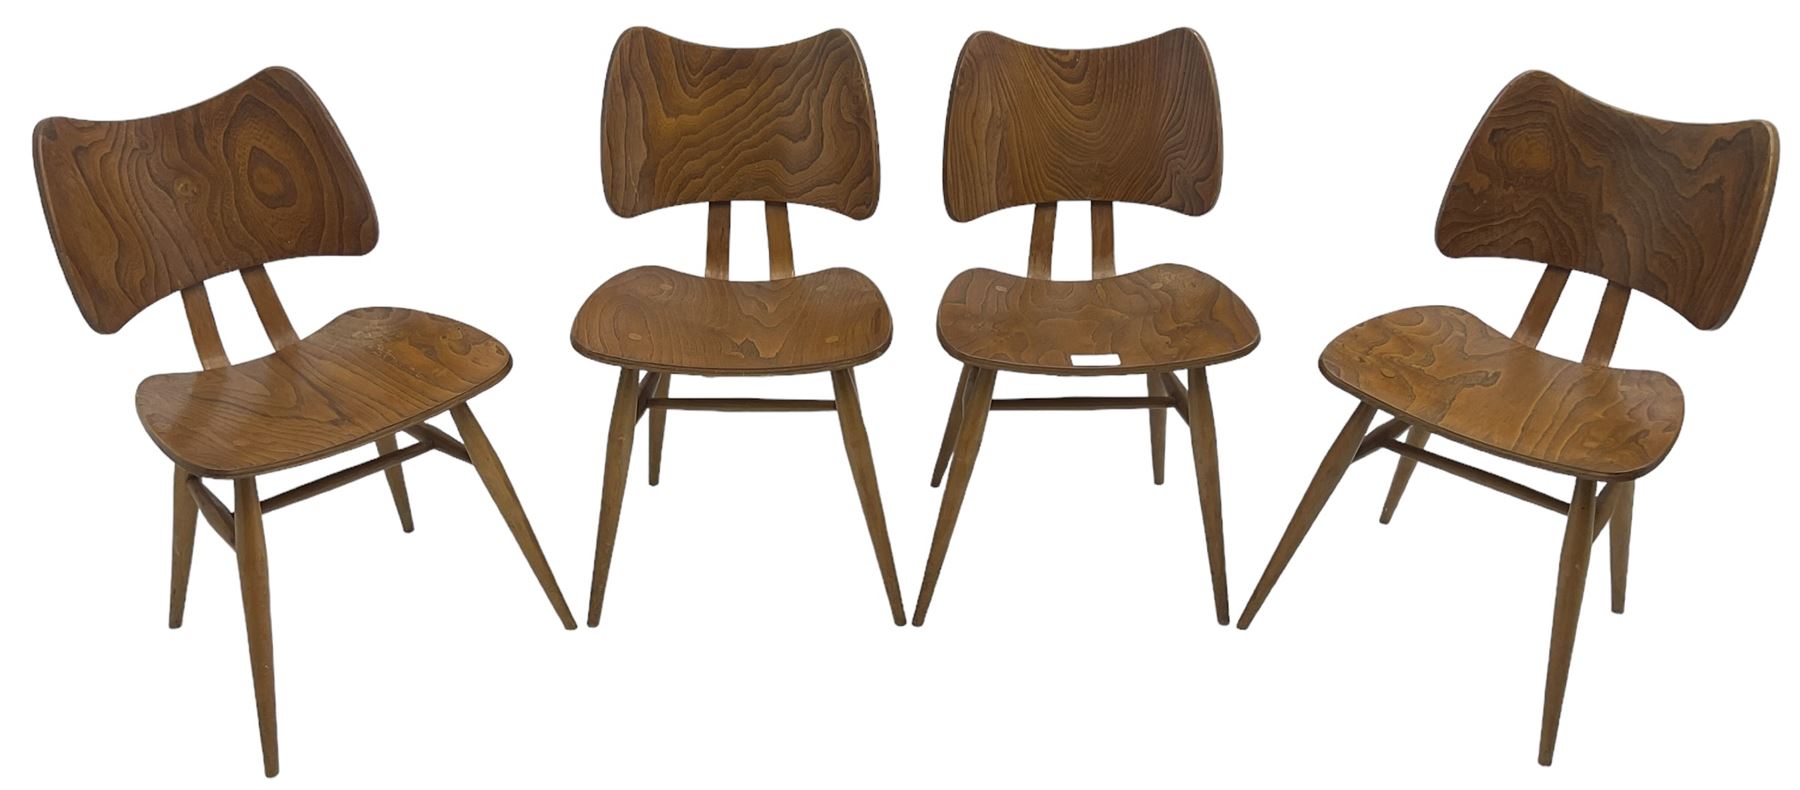 Lucian Ercolani - set of four ercol elm and beech model '401' dining chairs - Image 3 of 42